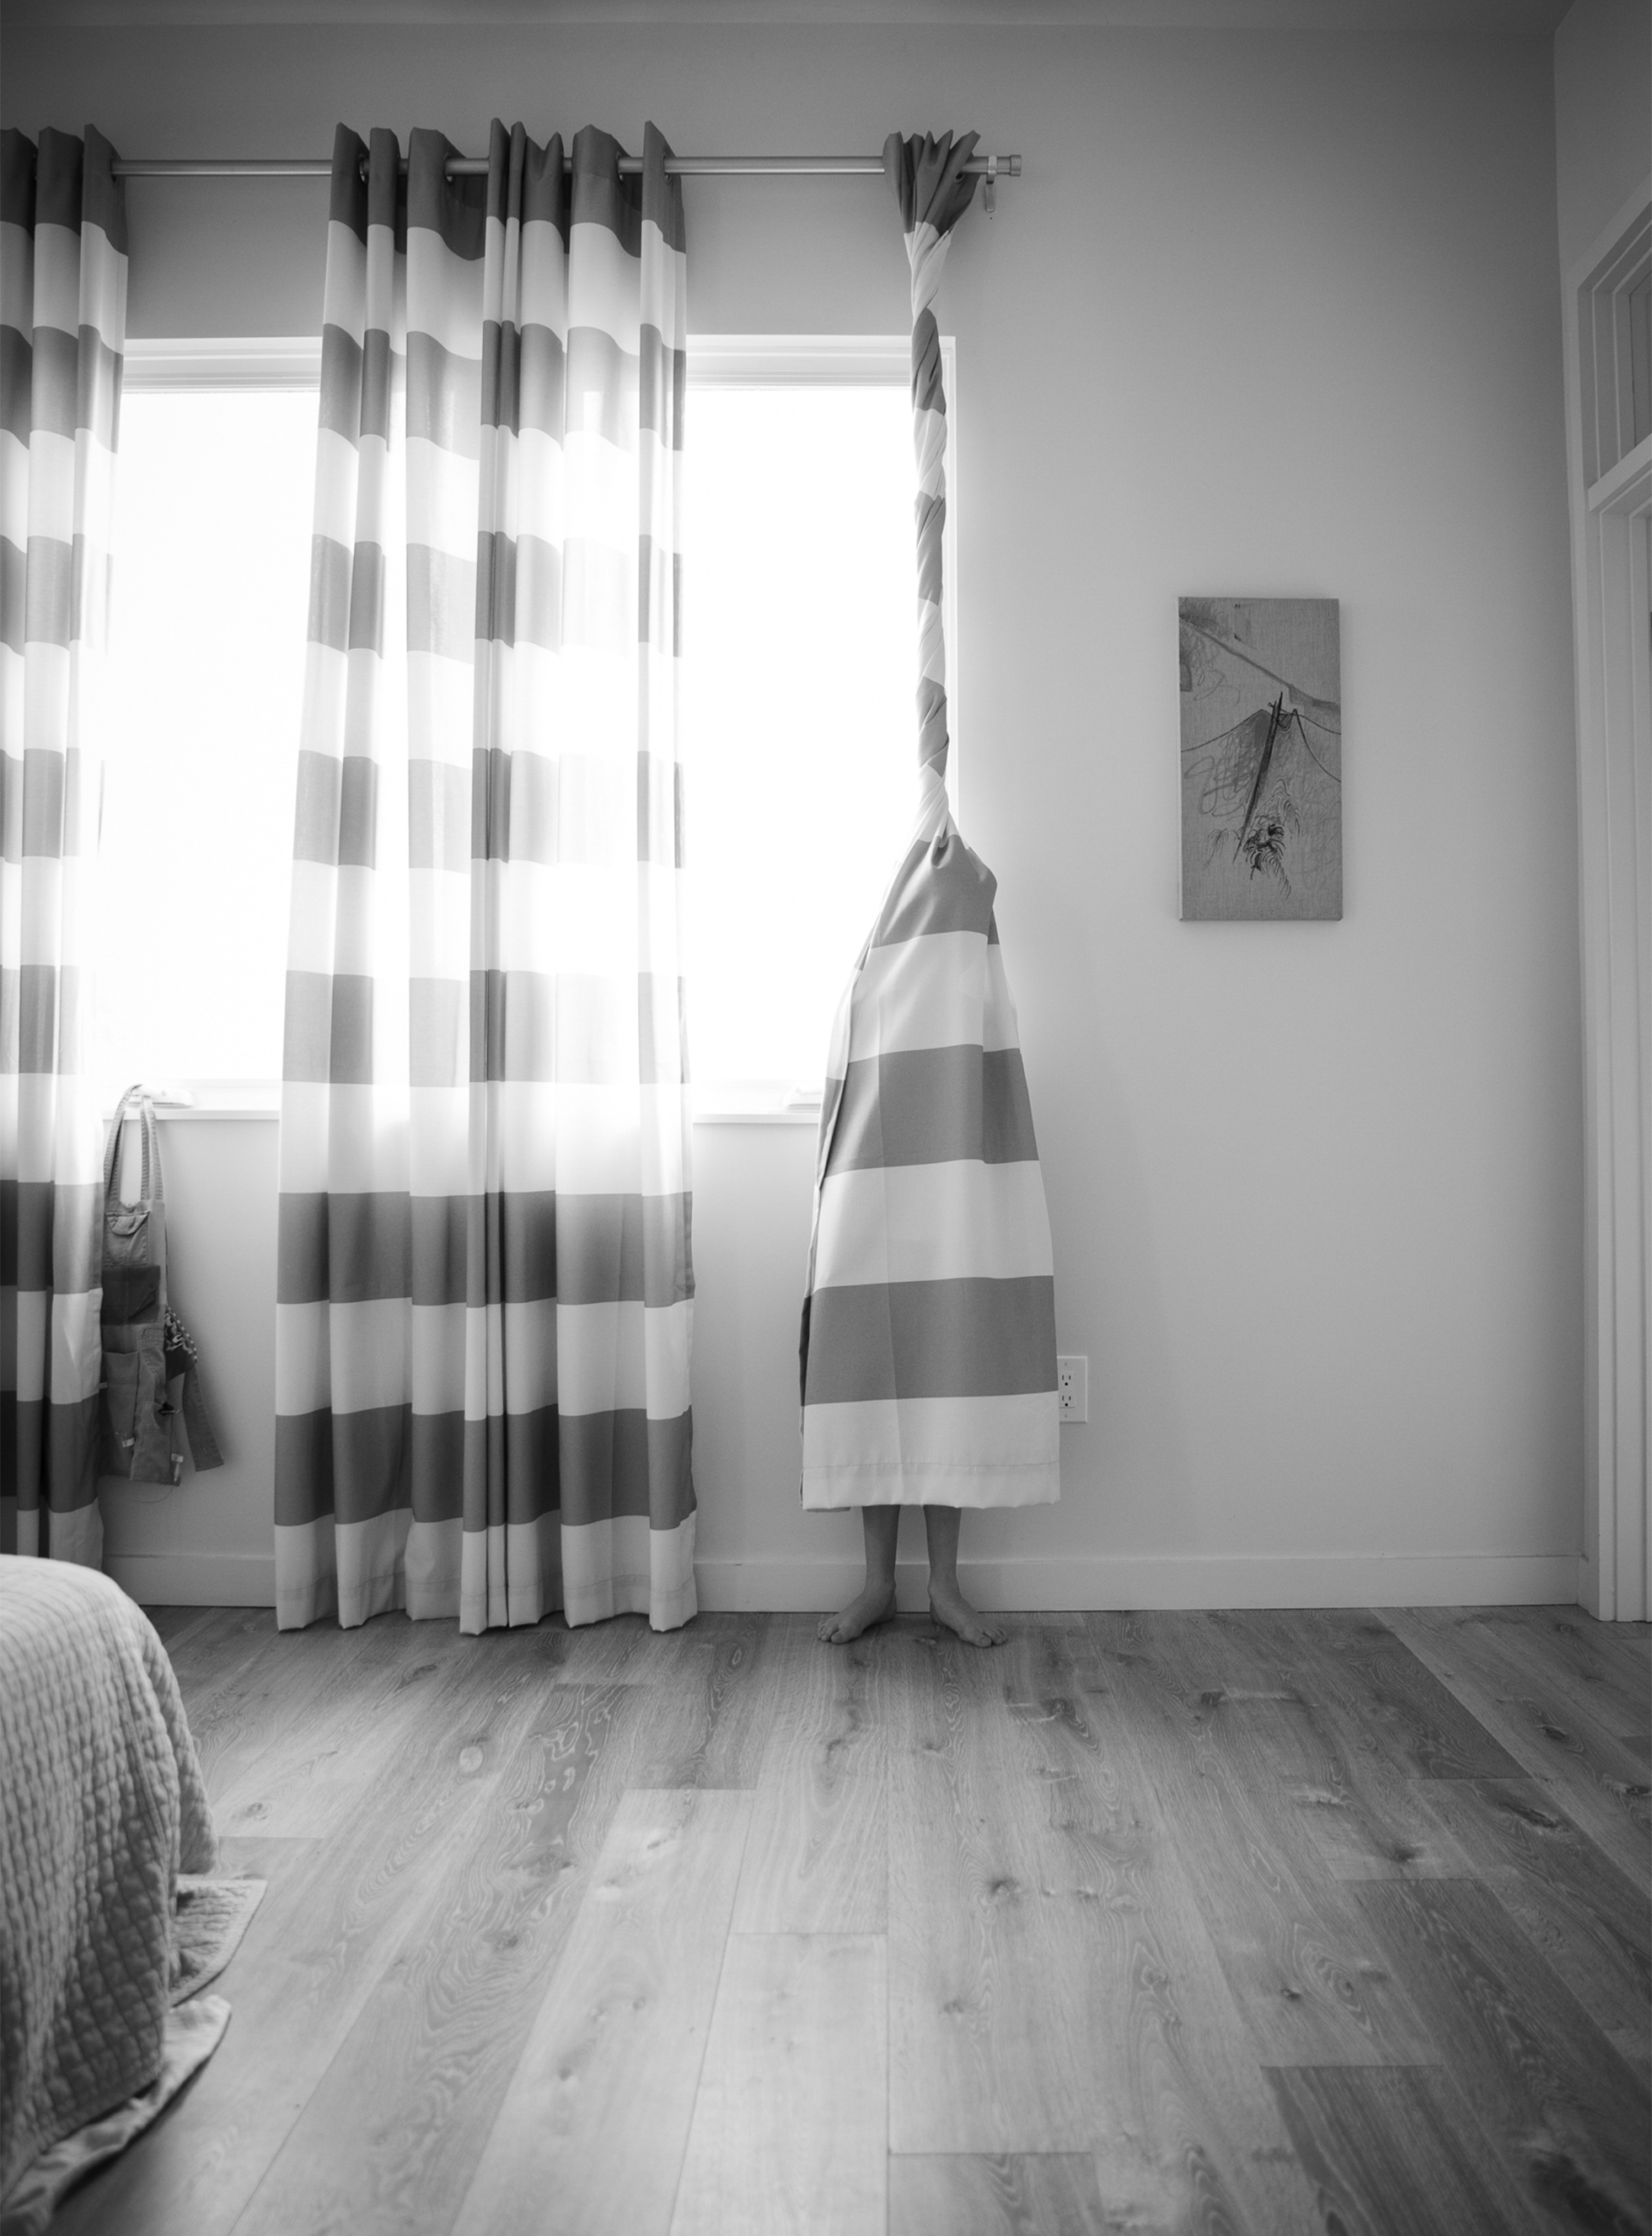 A child is wrapped in the right panel of a curtain with large horizonal stripes. The top of the curtain above the head is tightly wound and then the curtain flares out covering the body ending midcalf so part of the legs and bare feet are visible.